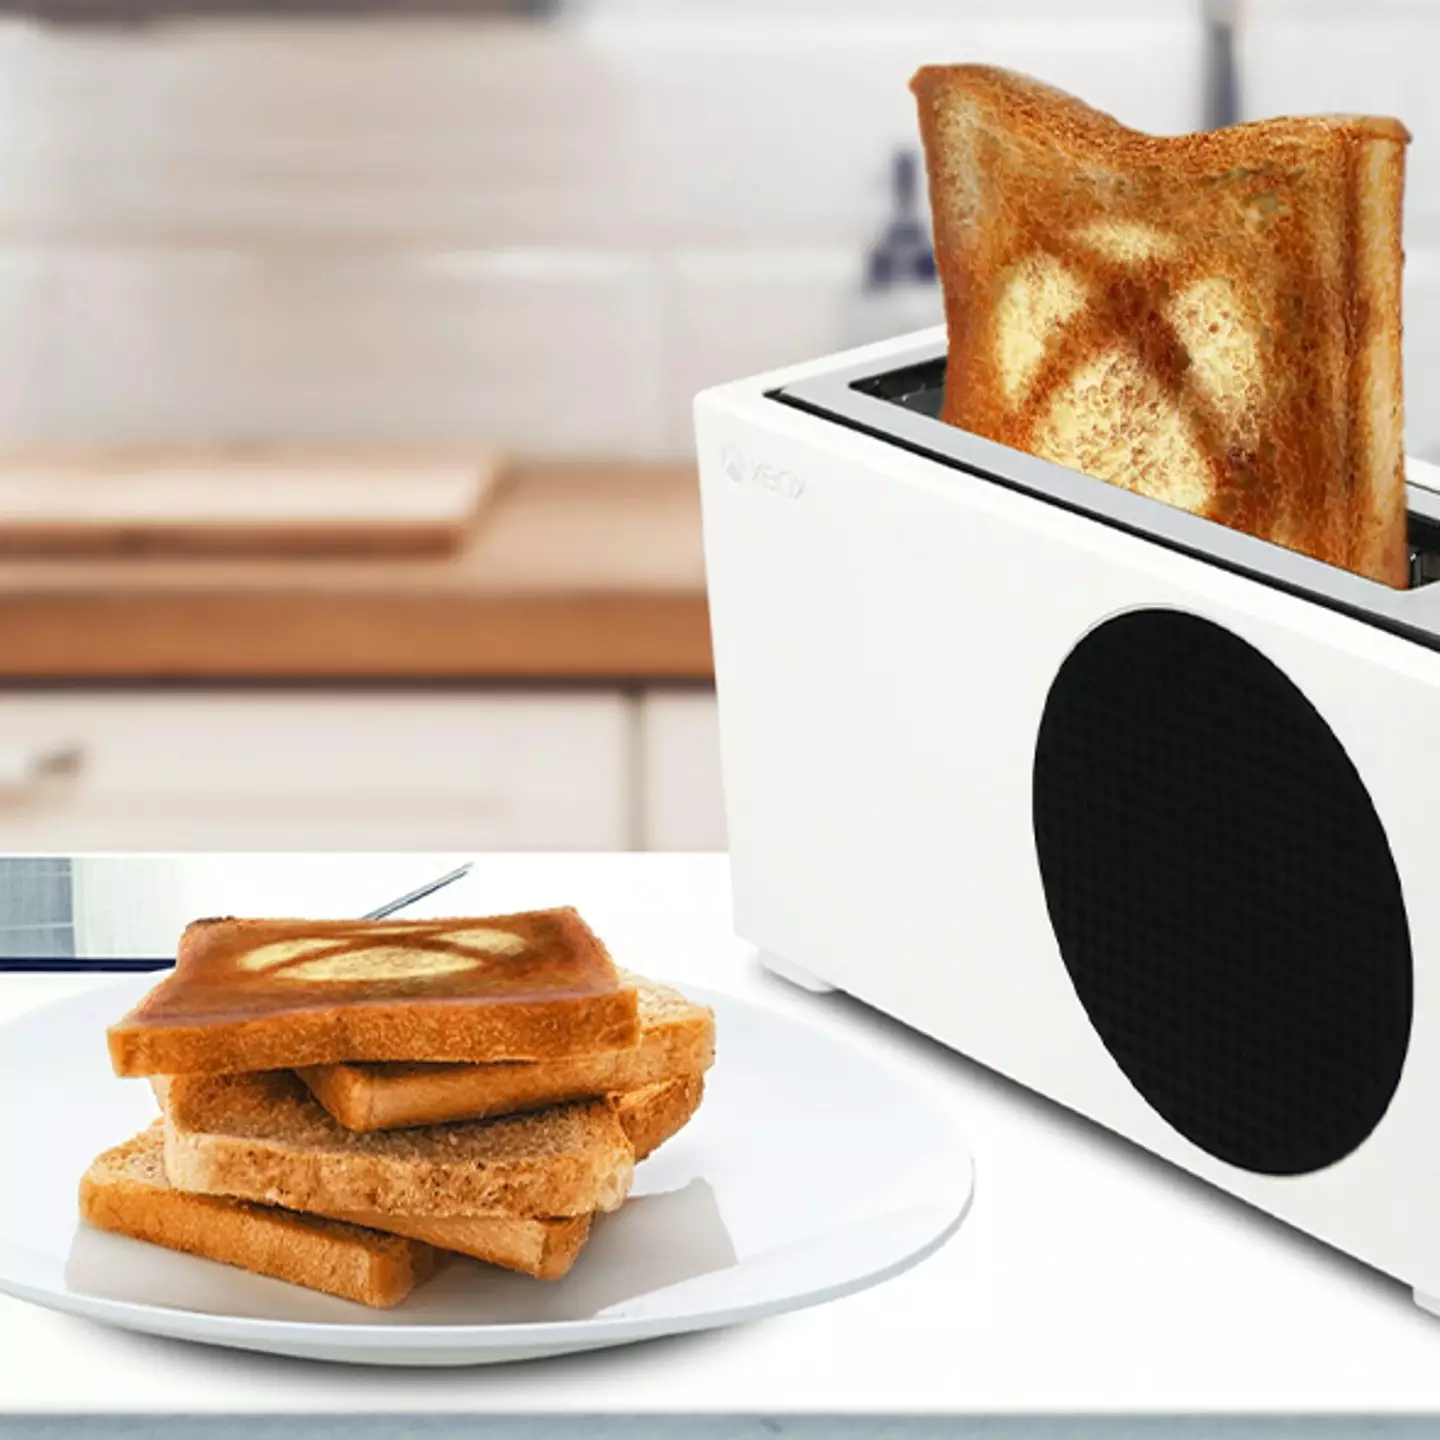 Walmart reveals the Xbox Series S toaster with the ability to imprint the Xbox logo on your toast